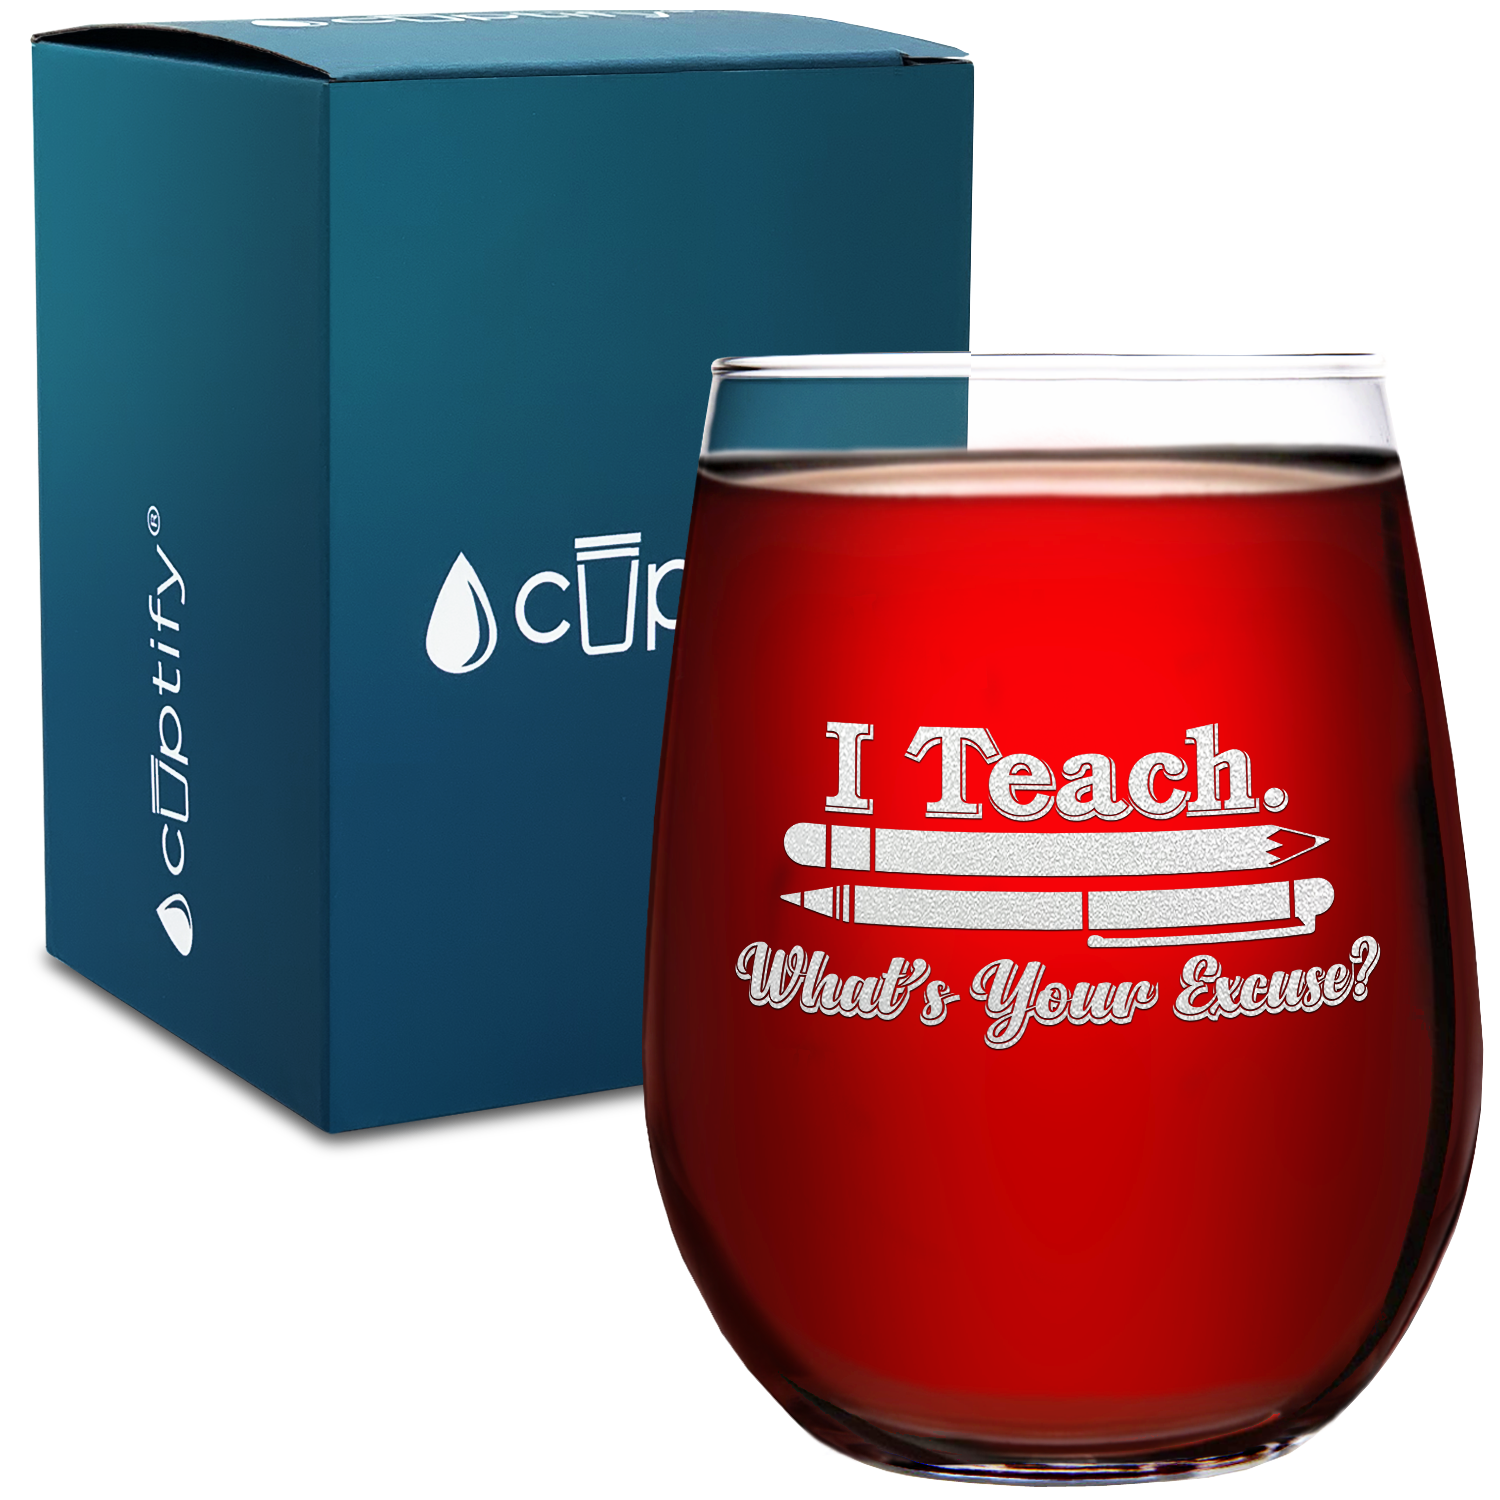 I Teach. Whats your Excuse on 17 oz Stemless Wine Glass